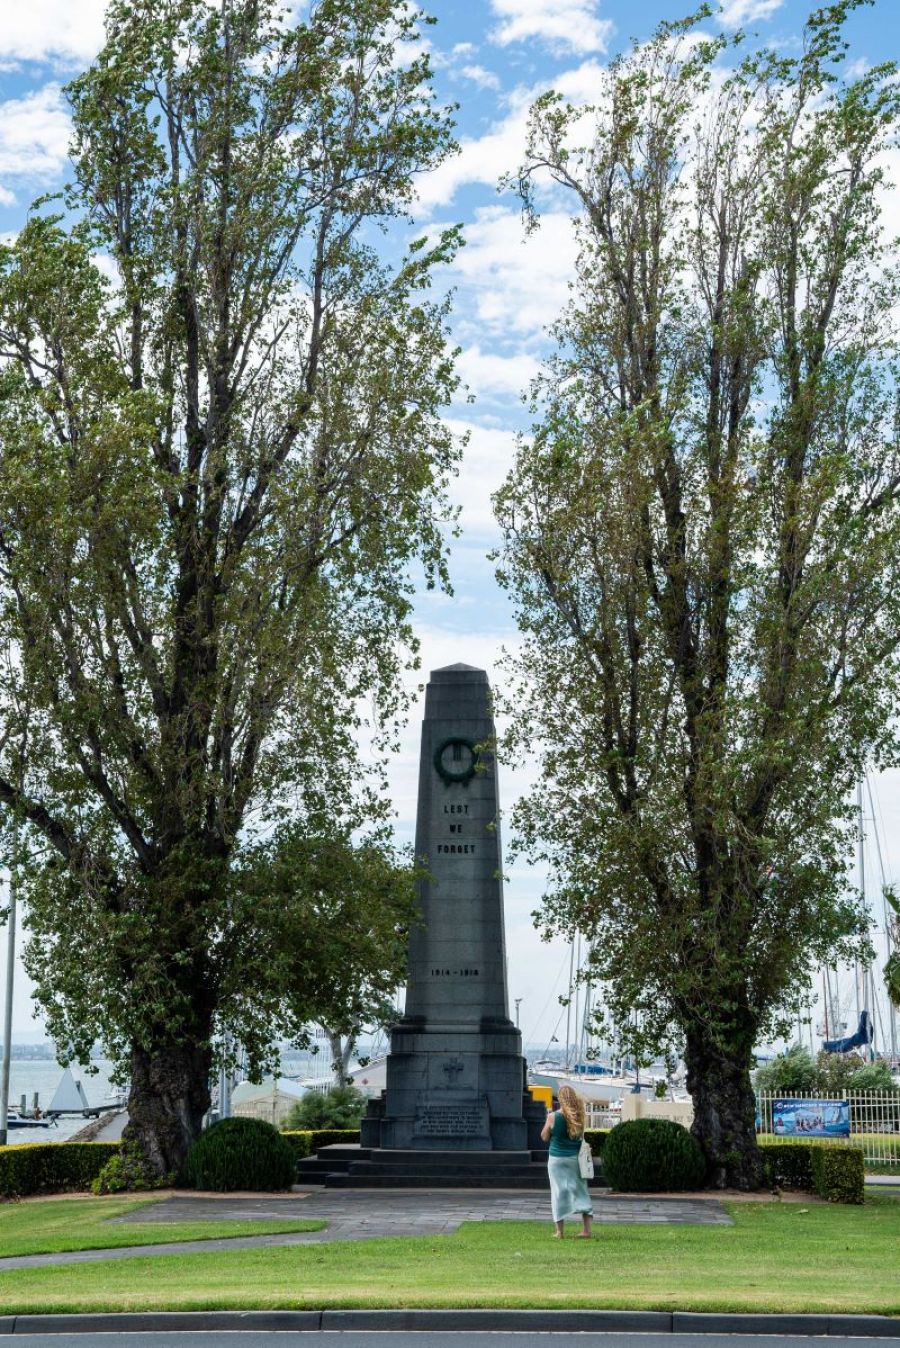 The cenotaph at Williamstown